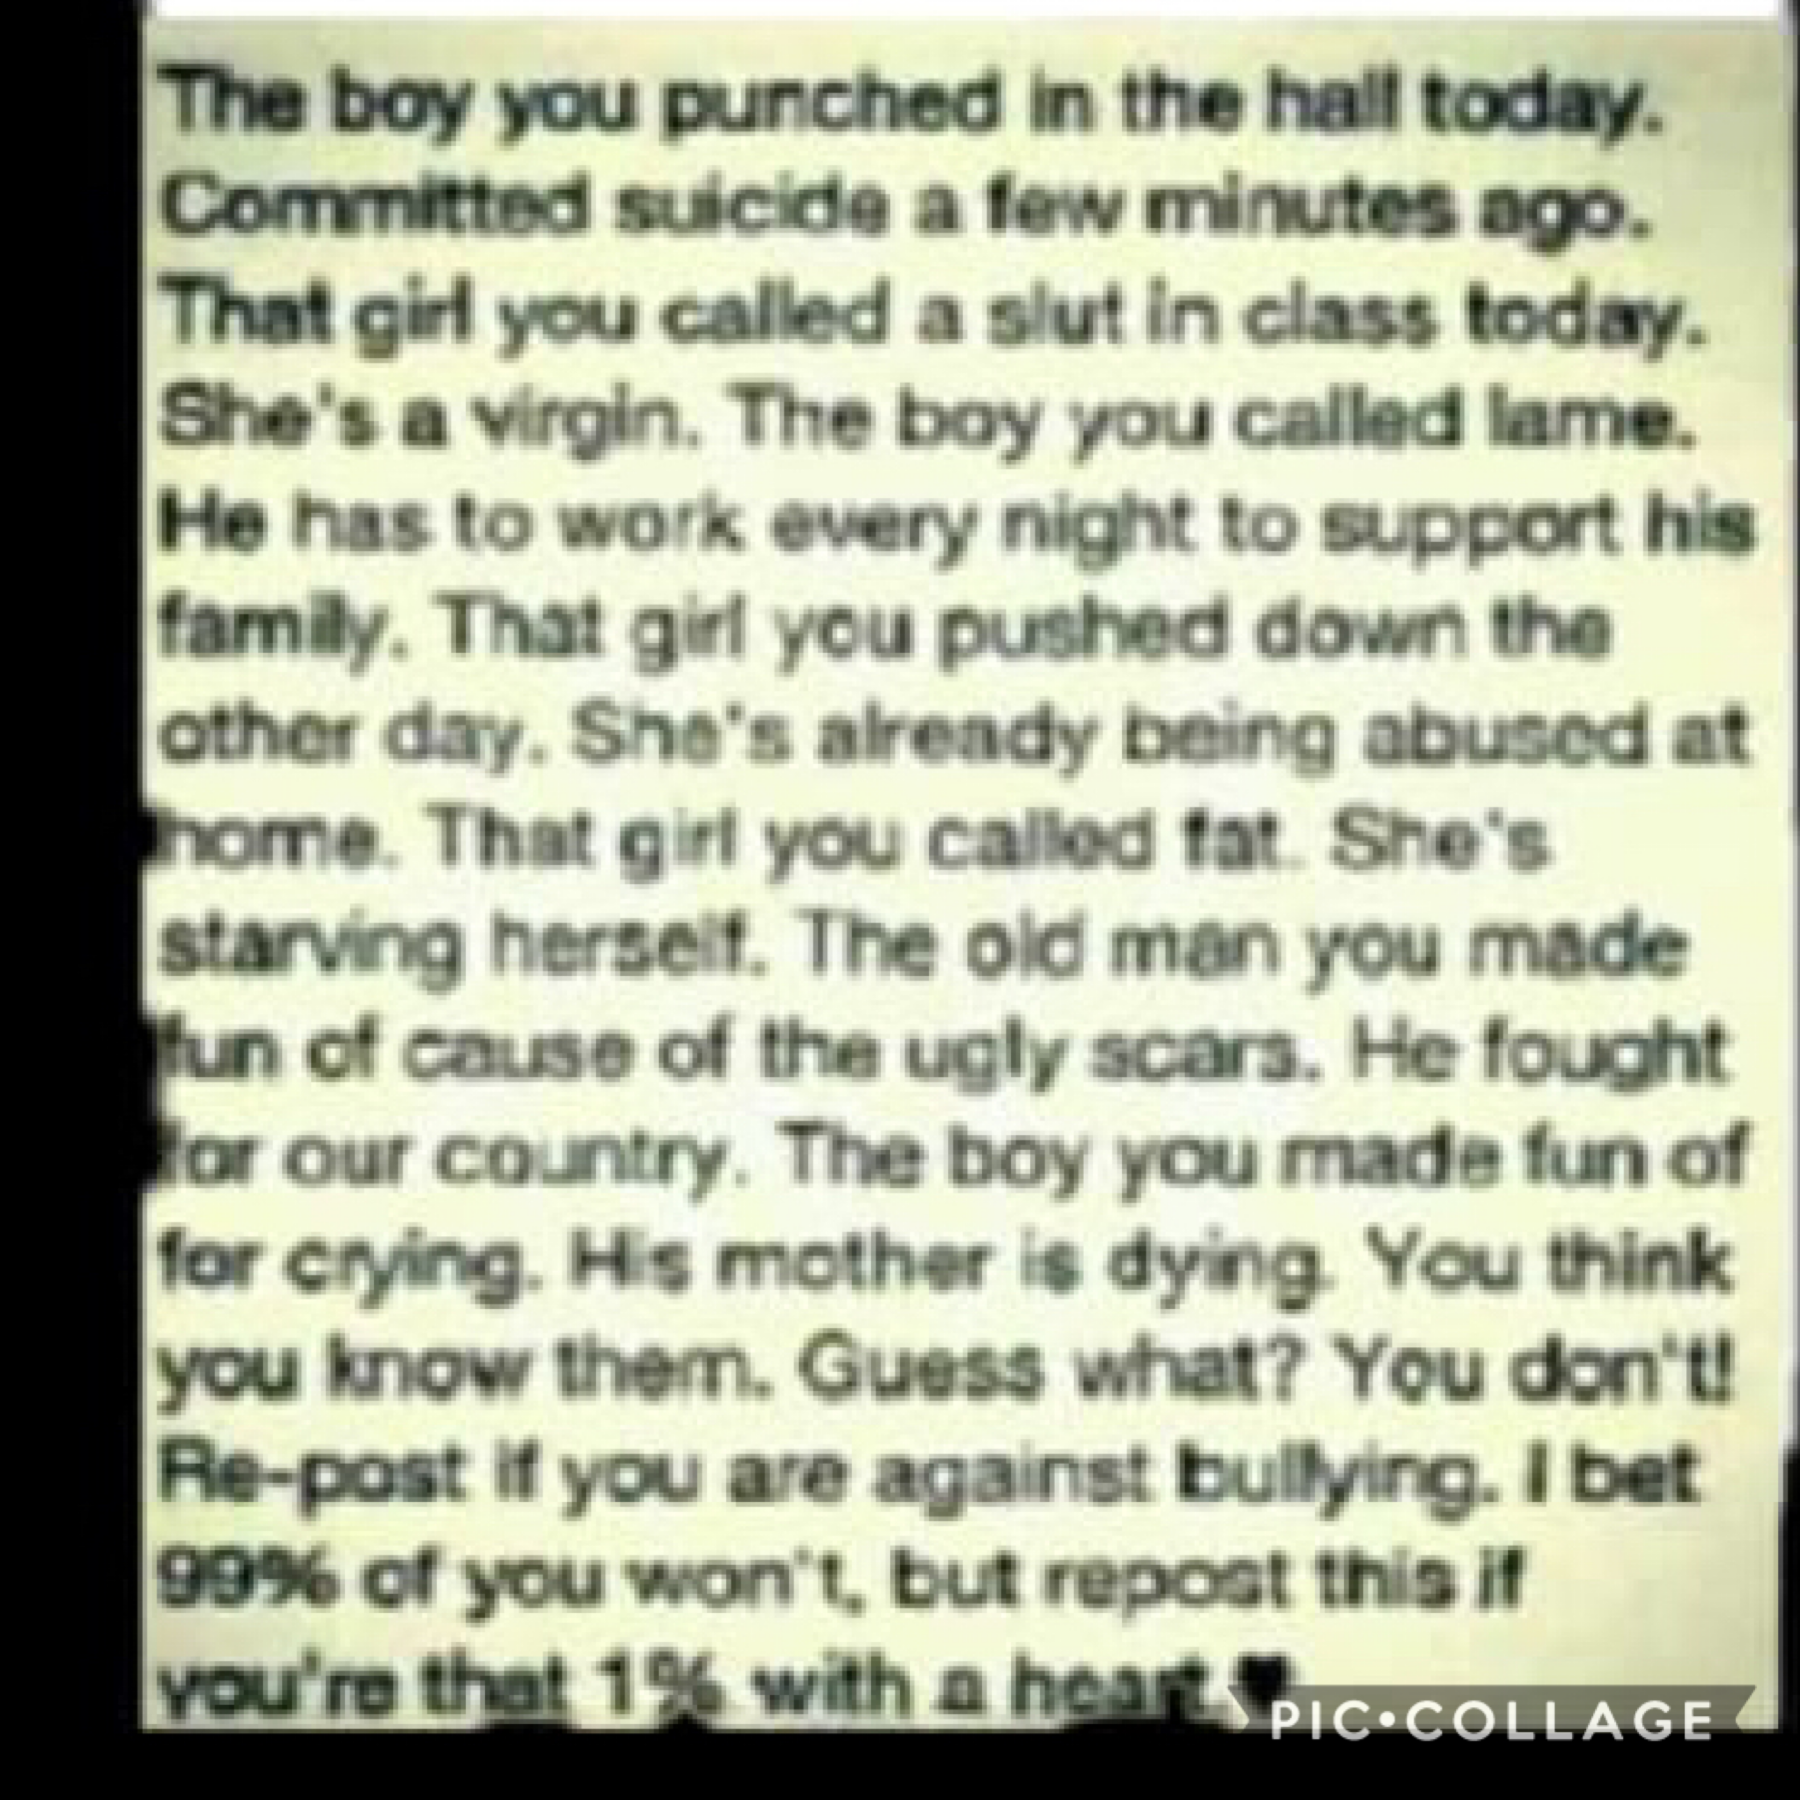 BULLYING NEEDS TO STOP TELL SOME ONE IF UR BEING BULLIED 